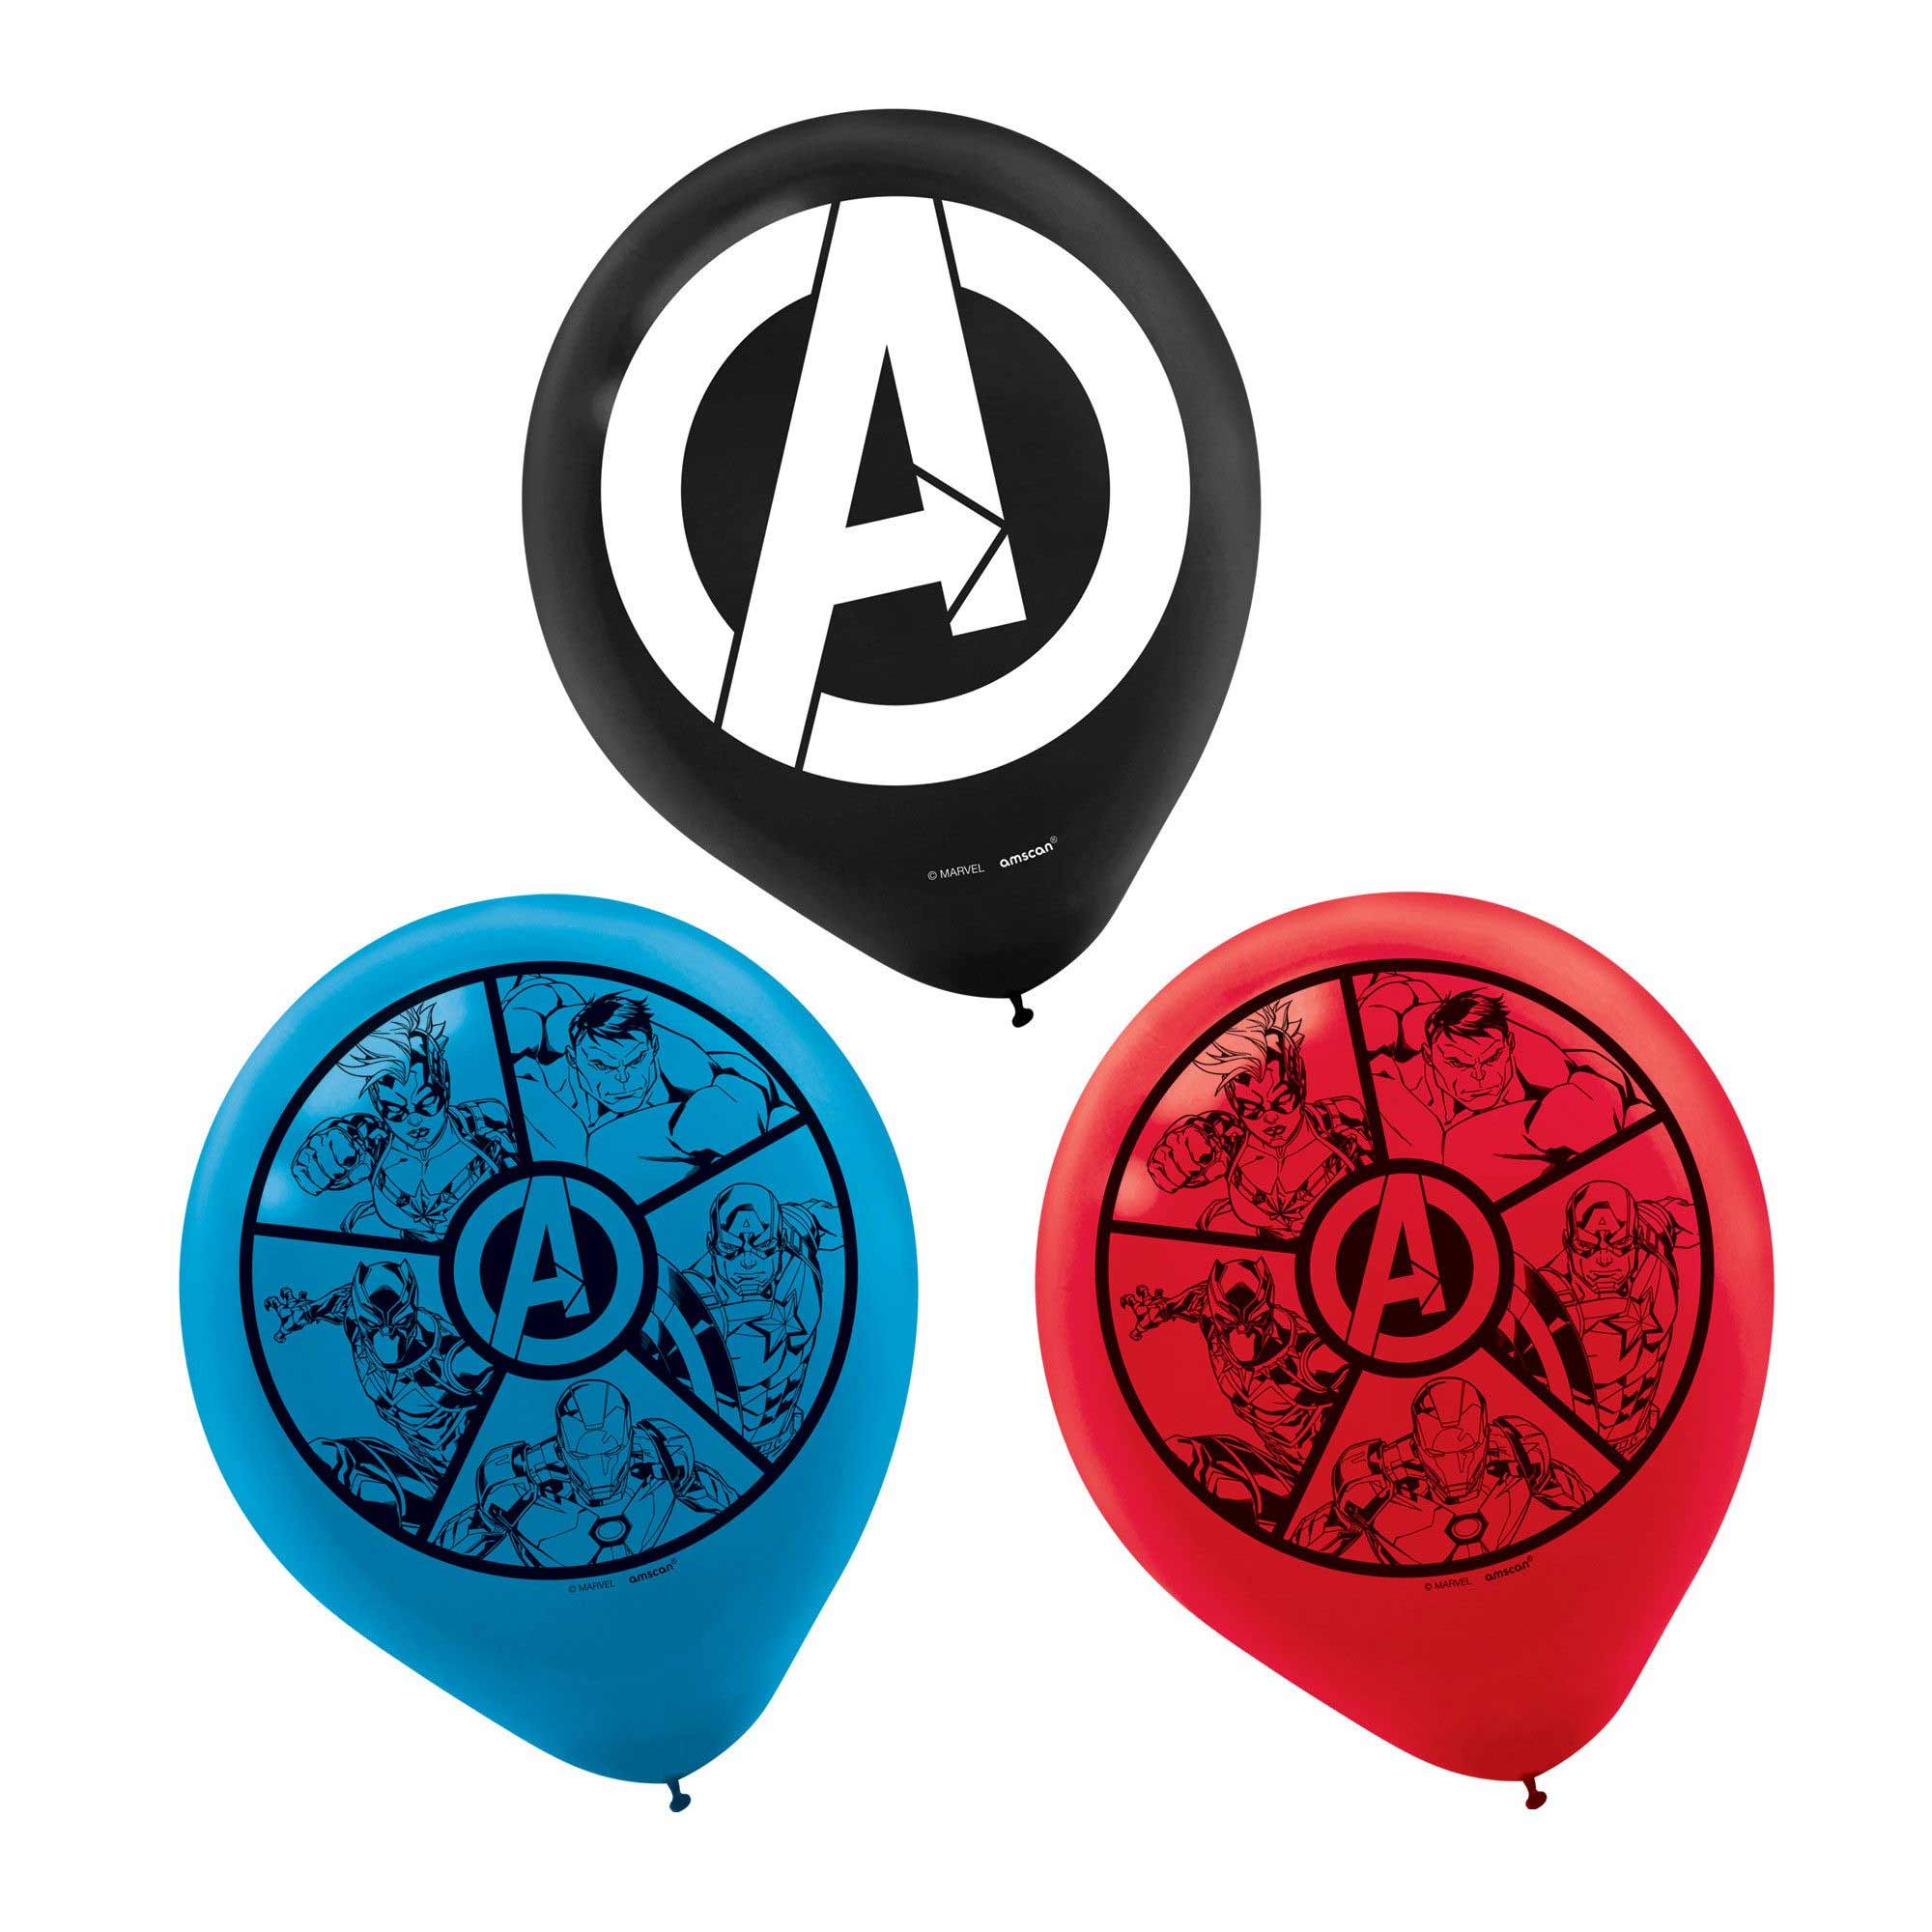 Avengers Powers Unite Printed Latex Balloon 12in, 6pcs Balloons & Streamers - Party Centre